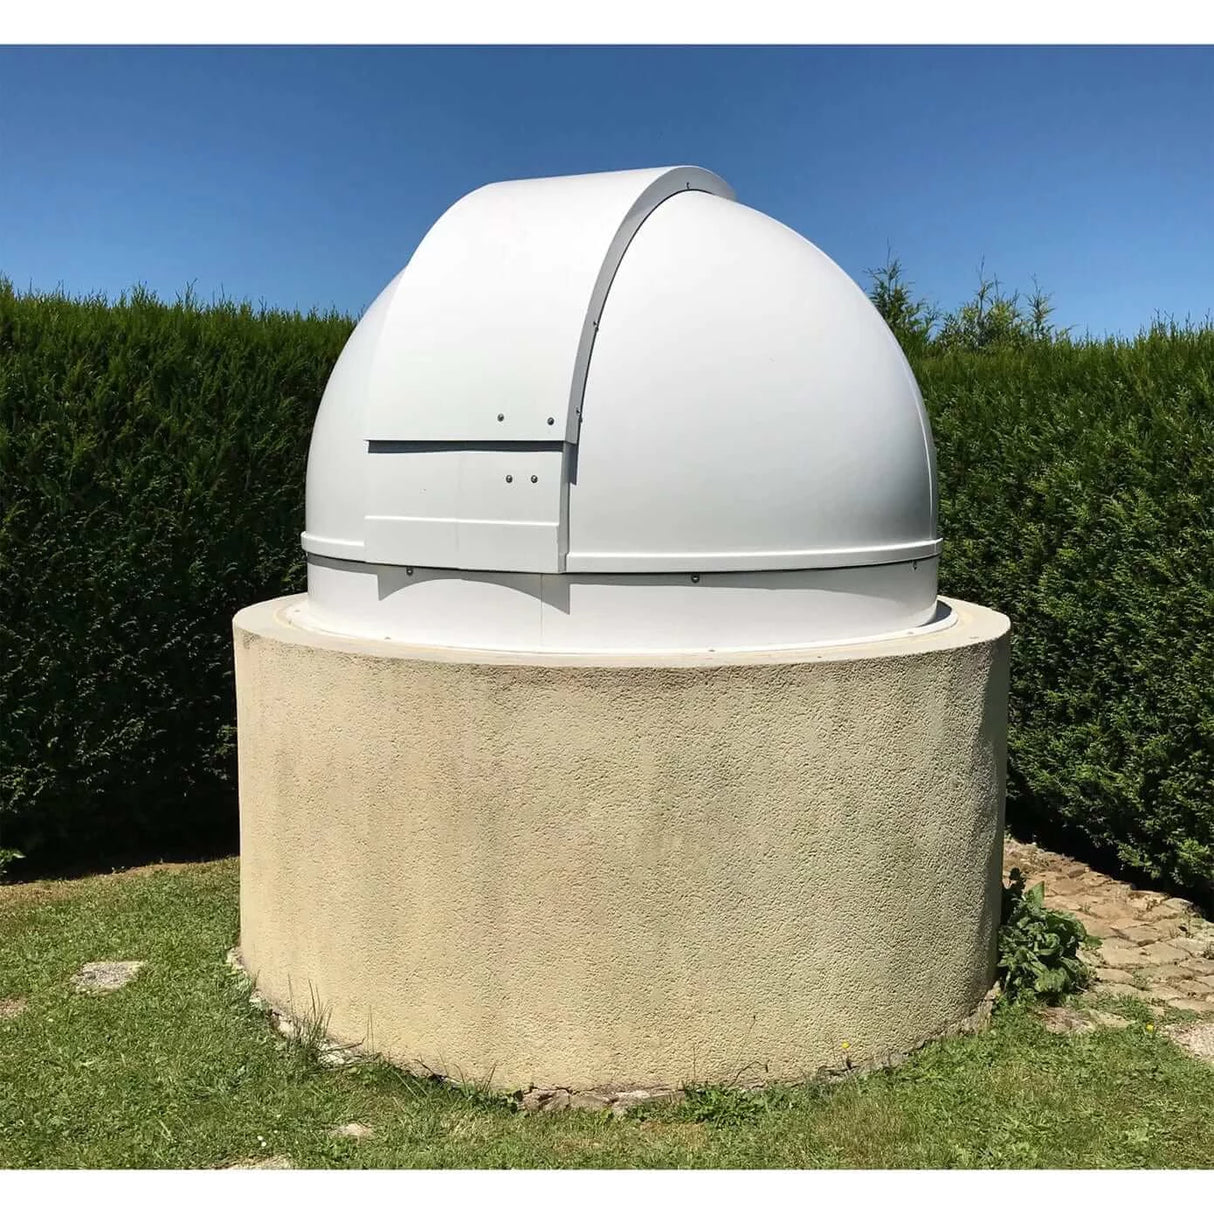 Pulsar 2.2m Short Height Observatory Dome | ES-4900500 |